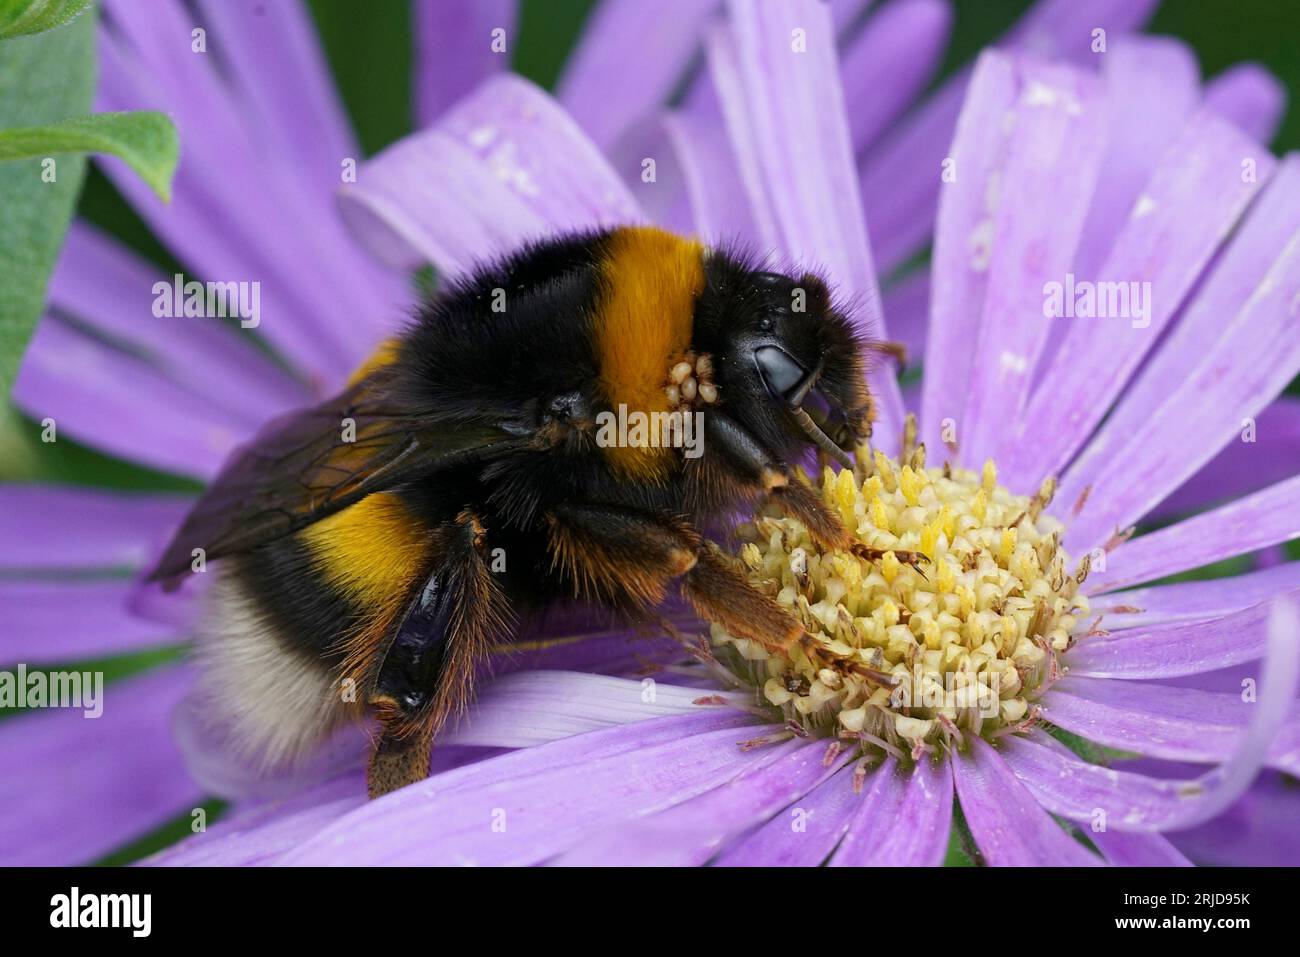 Natural georgeous colorful closeup on a queen Large earth bumblebee, Bombus terrestris grup, sitting on a blue Aster Stock Photo